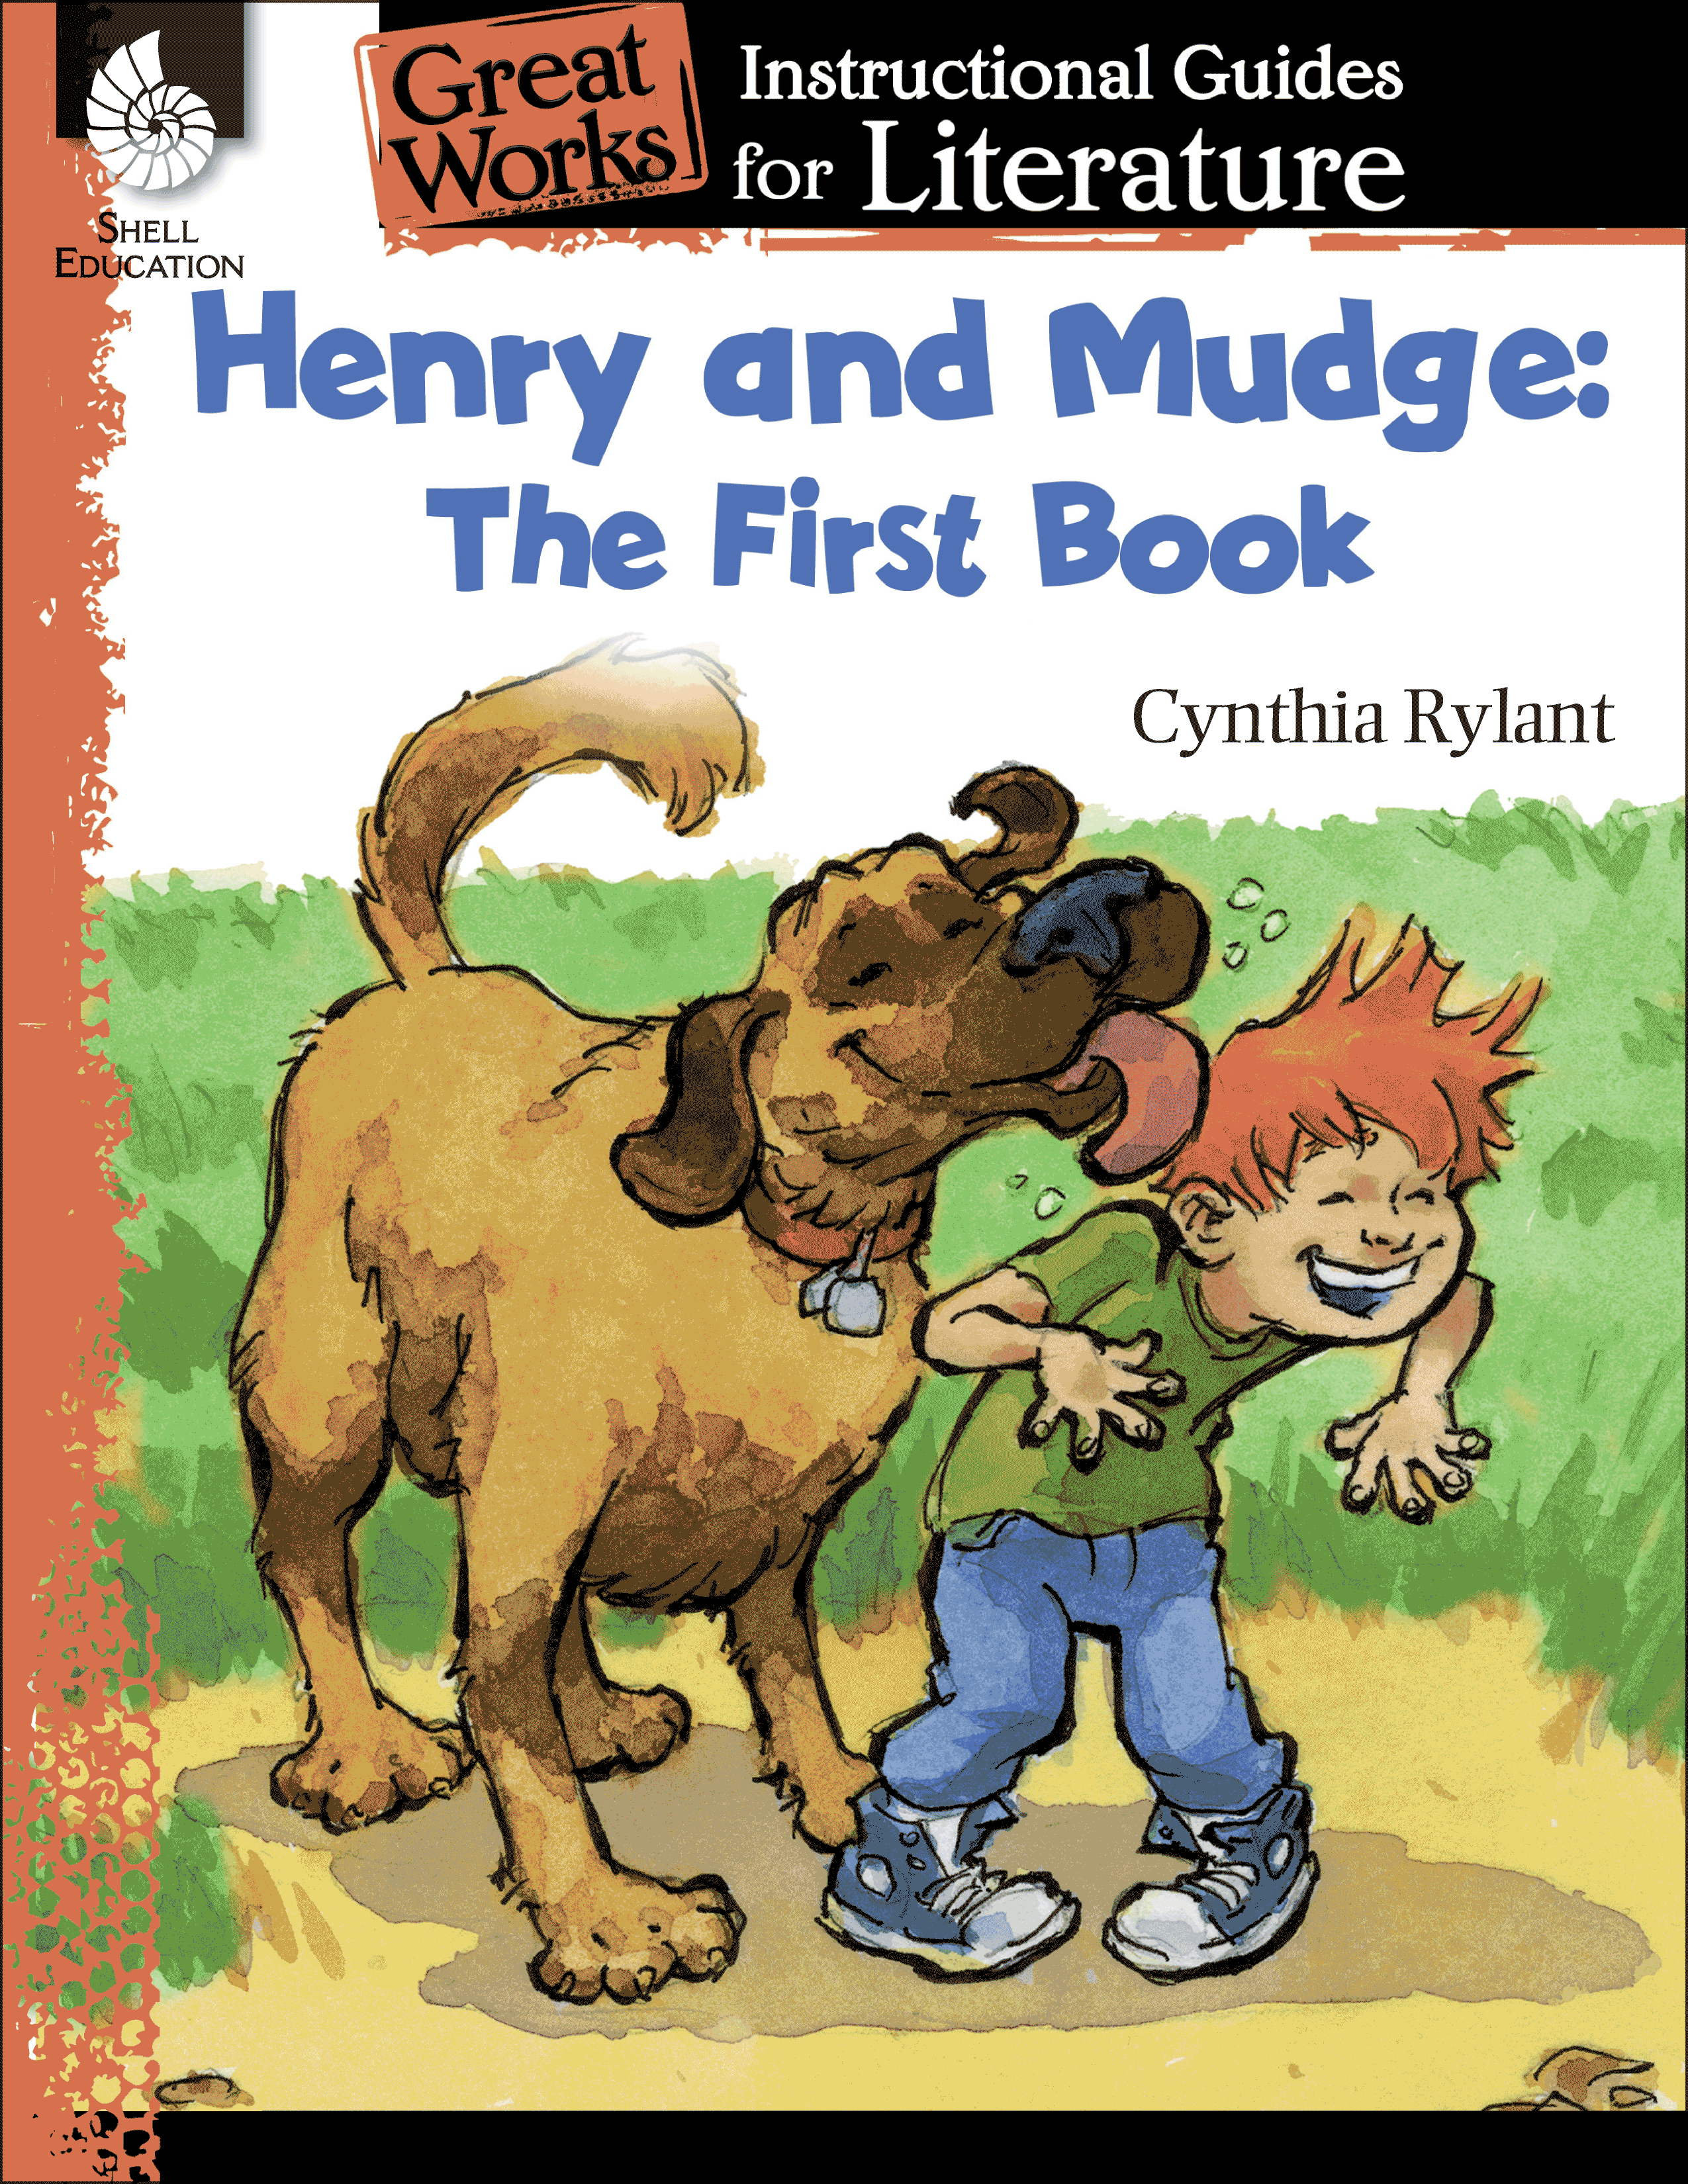 henry-and-mudge-the-first-book-an-instructional-guide-for-literature